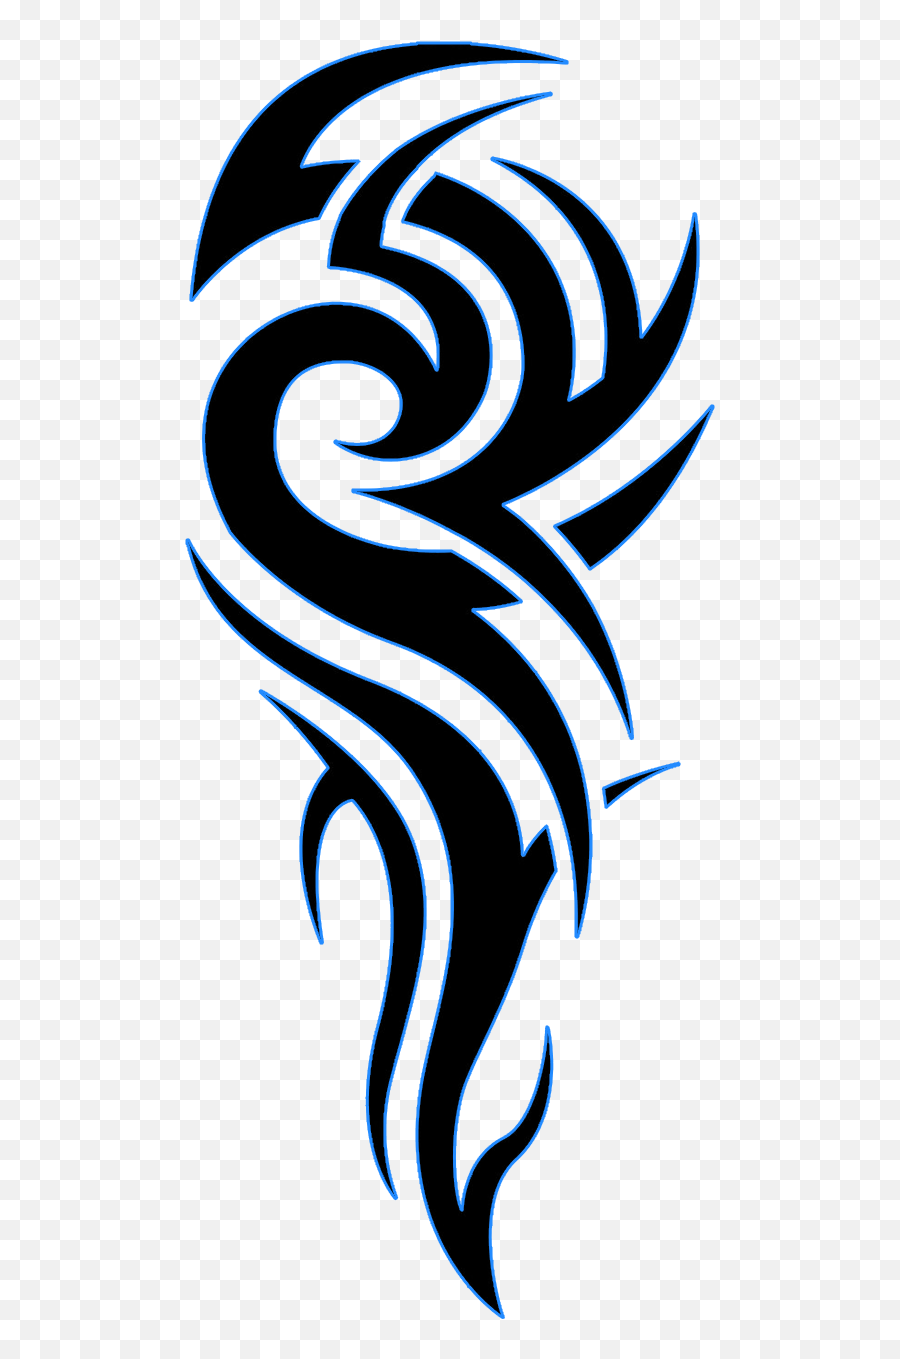 Download Tribal Designs Png - Png Tattoo,Tribal Design Png